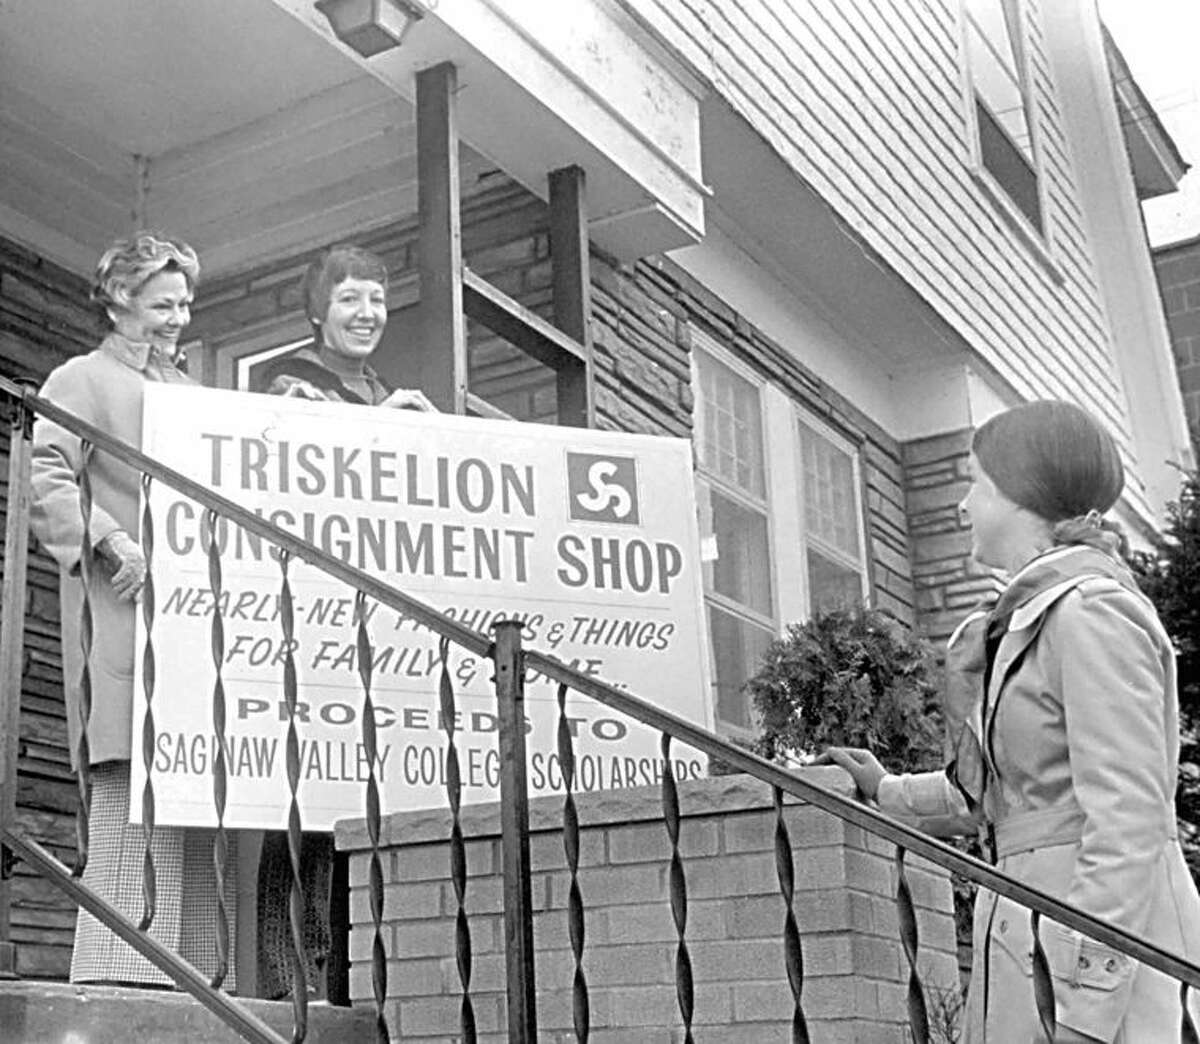 Moving Day: Mrs. Harriet Hutchenreuter, Mrs. Rhosan Stryker and Mrs. Jan Jones survey the new sign for the Triskelion Consignment Shop. The store, which sells next to new clothing to area residents, will be moving to the corner of Larkin and Townsend streets. The Triskelion shop is manned by volunteers and was organized to earn scholarship money for Saginaw Valley College. (First published March 13, 1974, in the Daily News)